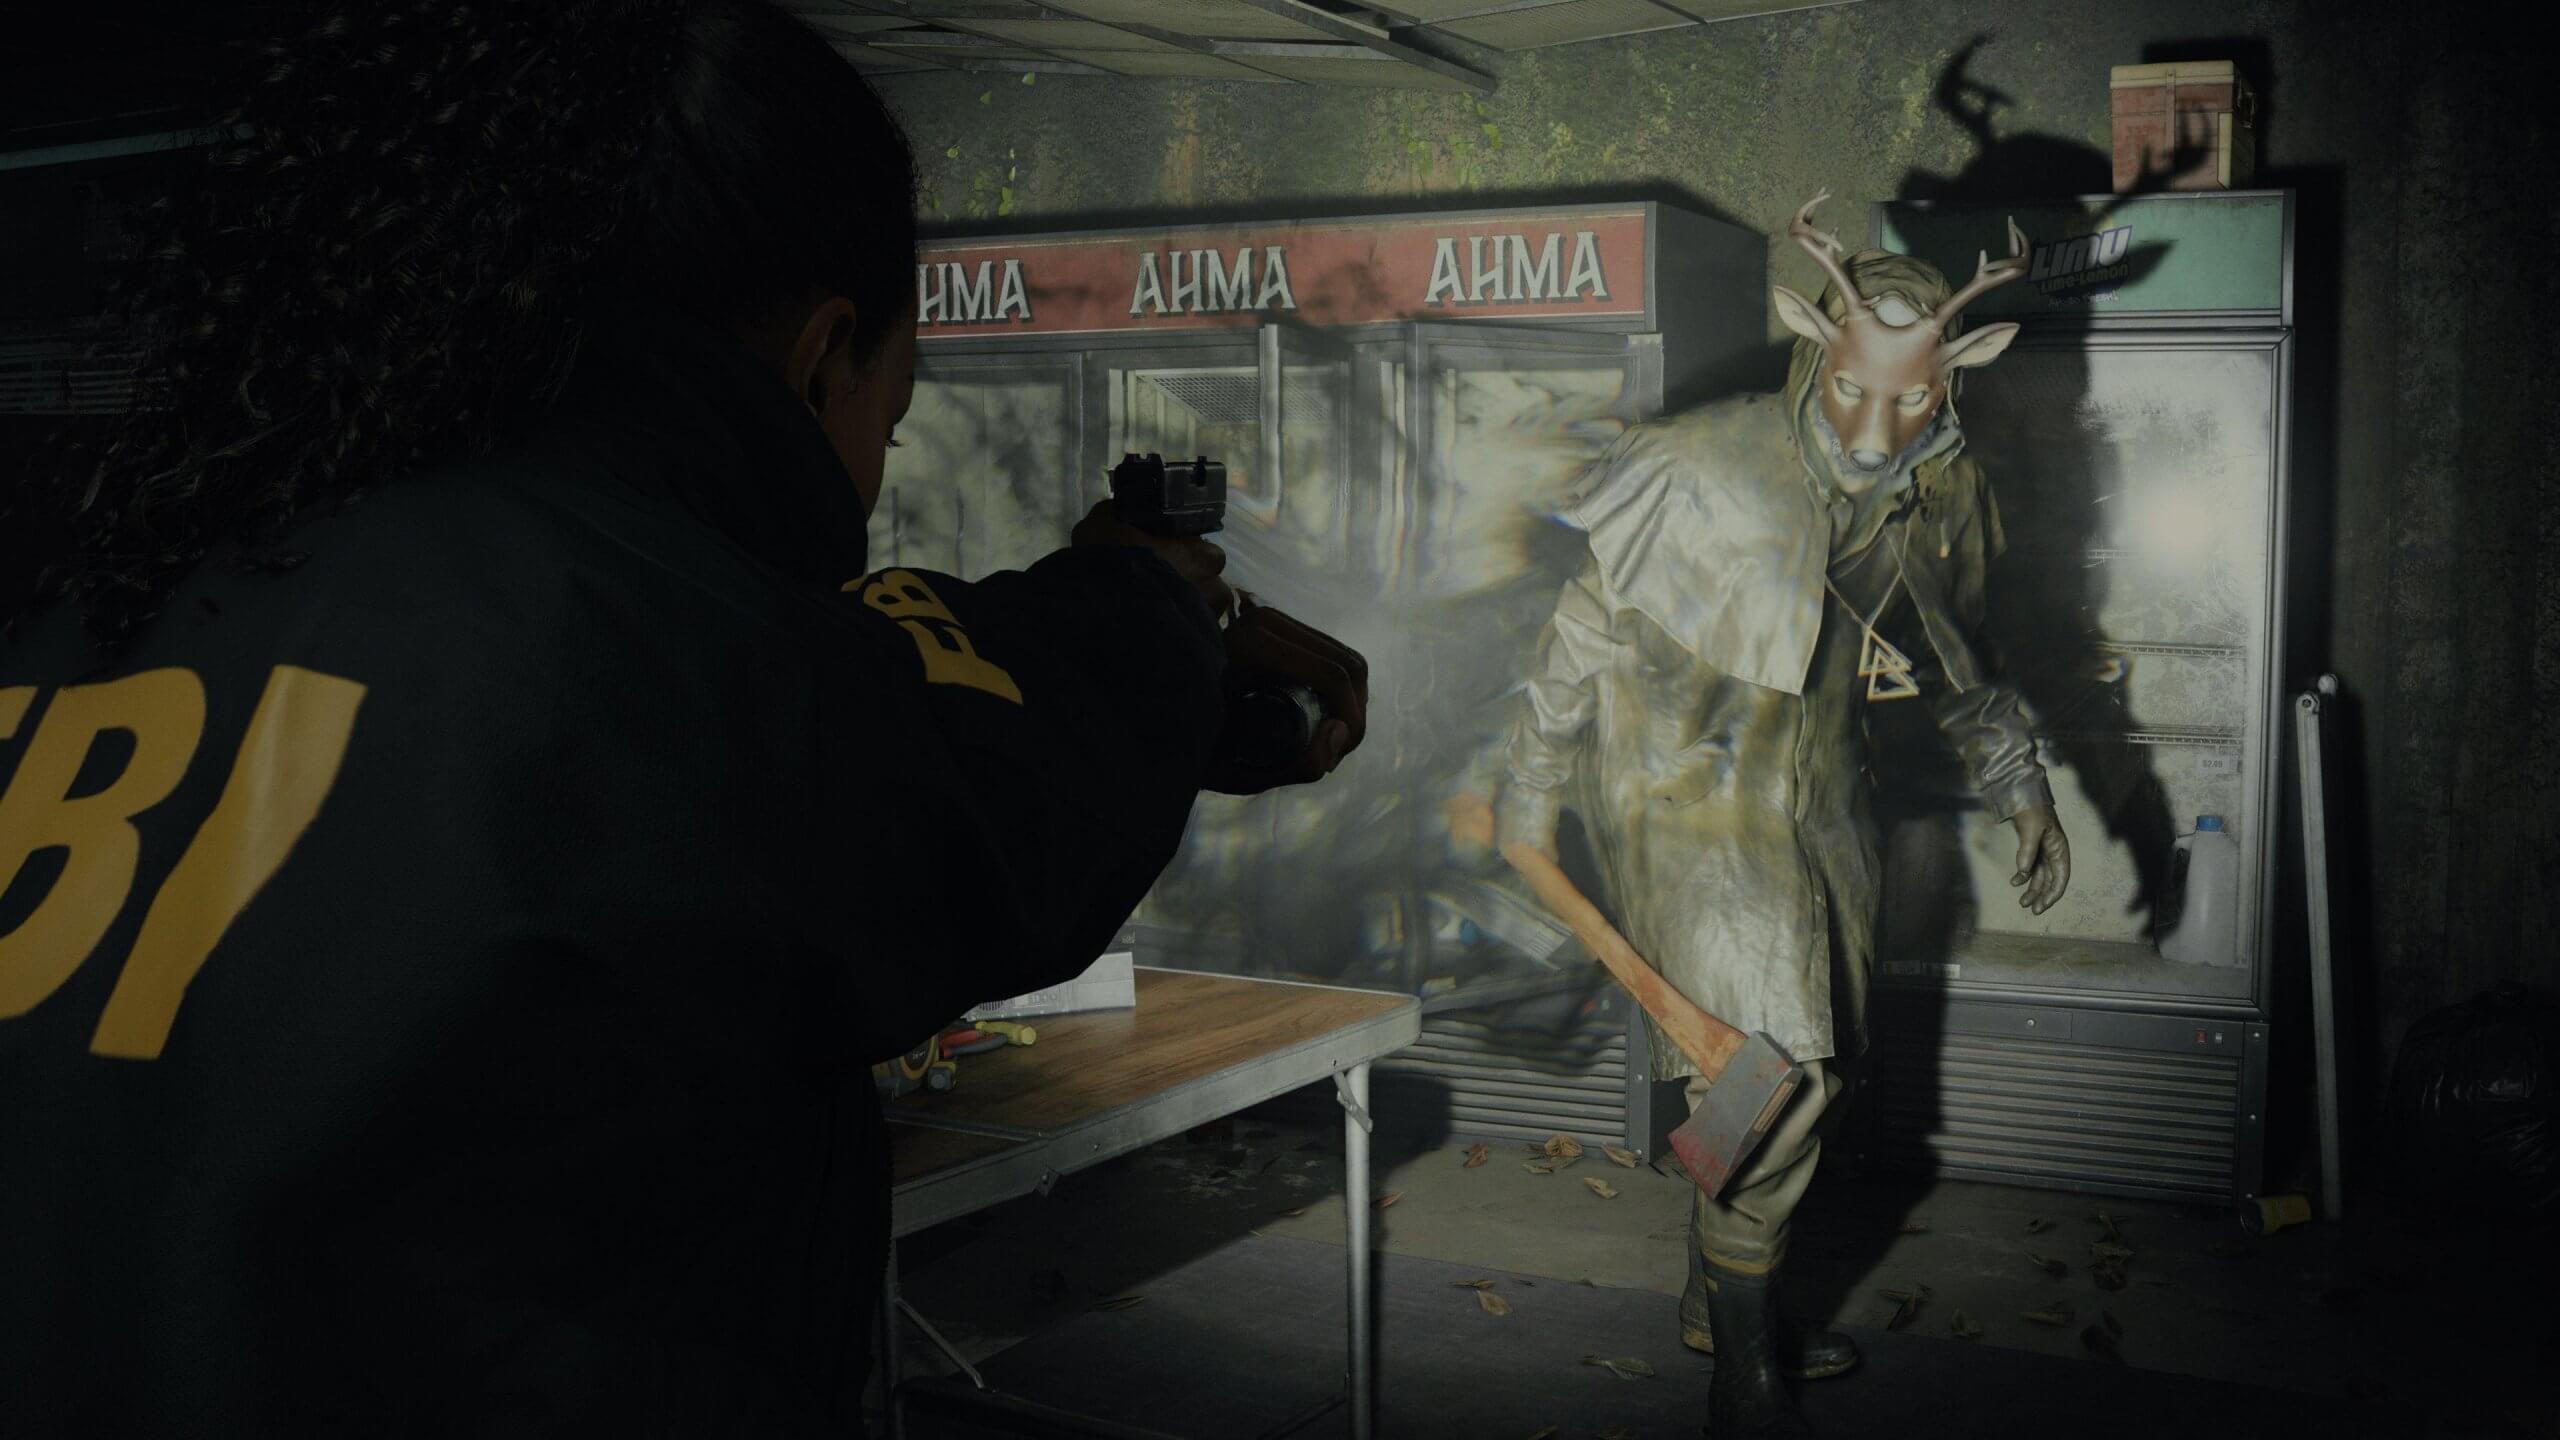 Alan Wake 2 PC Requirements Are Very Demanding Even Without Ray